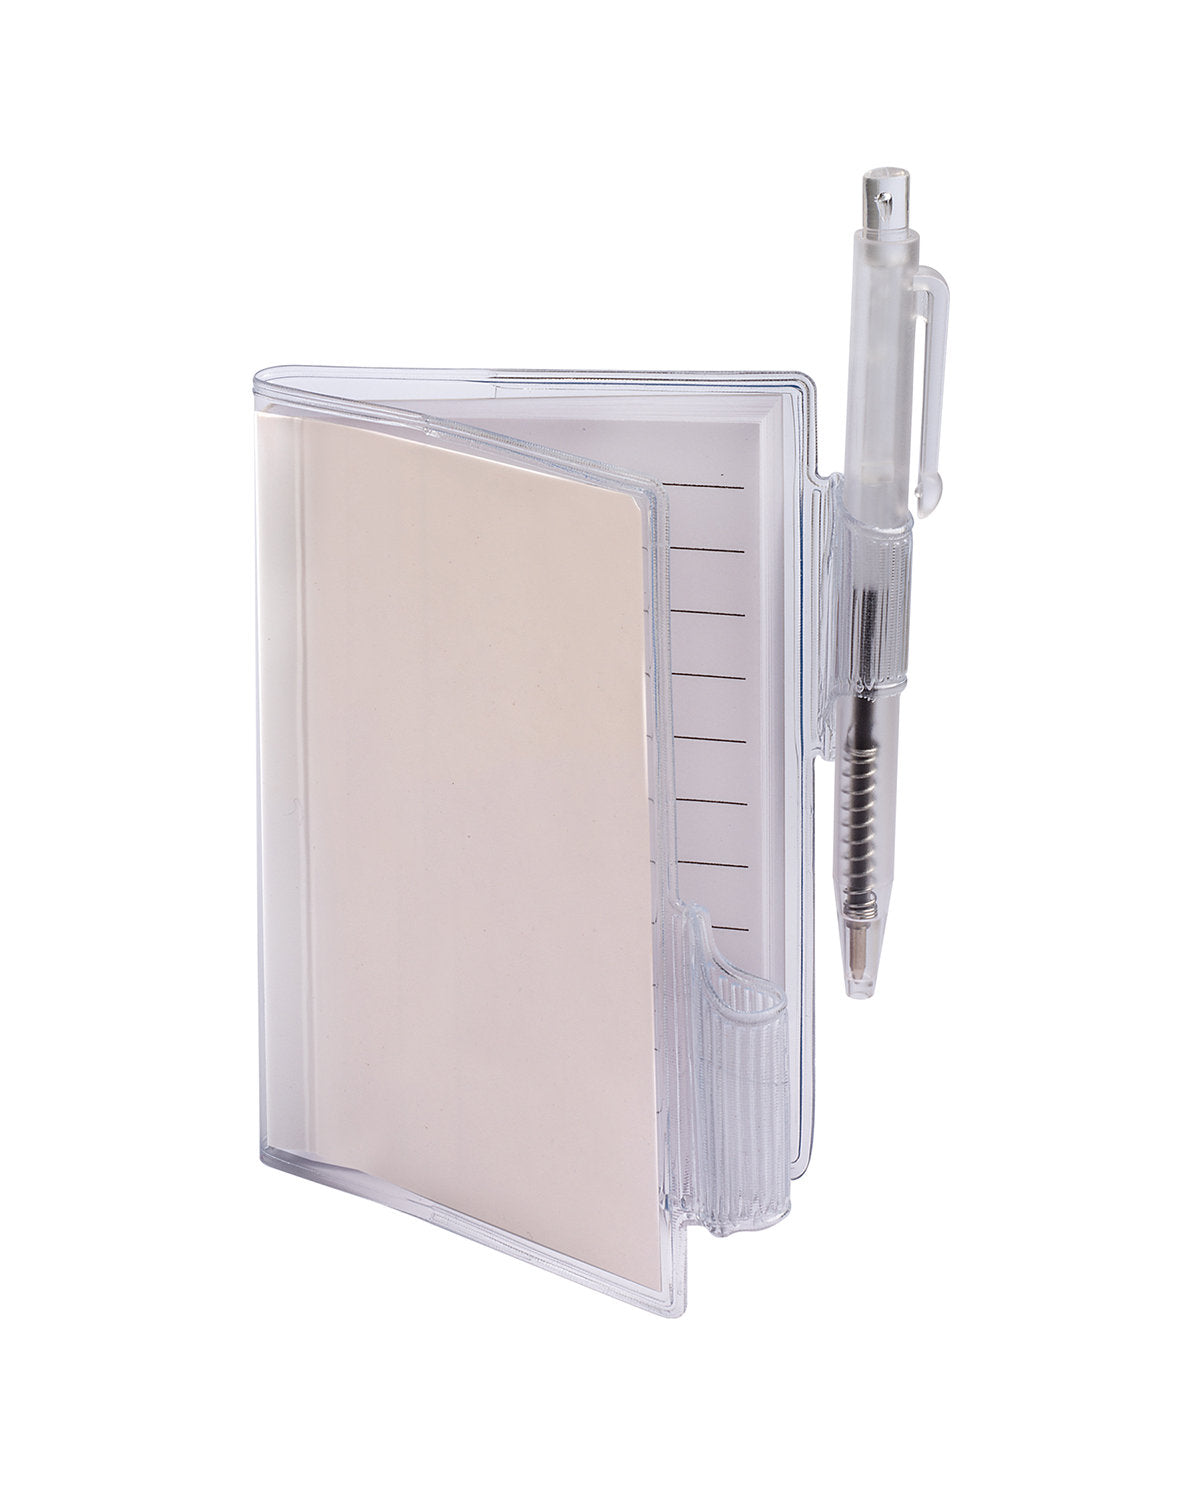 Clear-View Jotter With Pen - SP